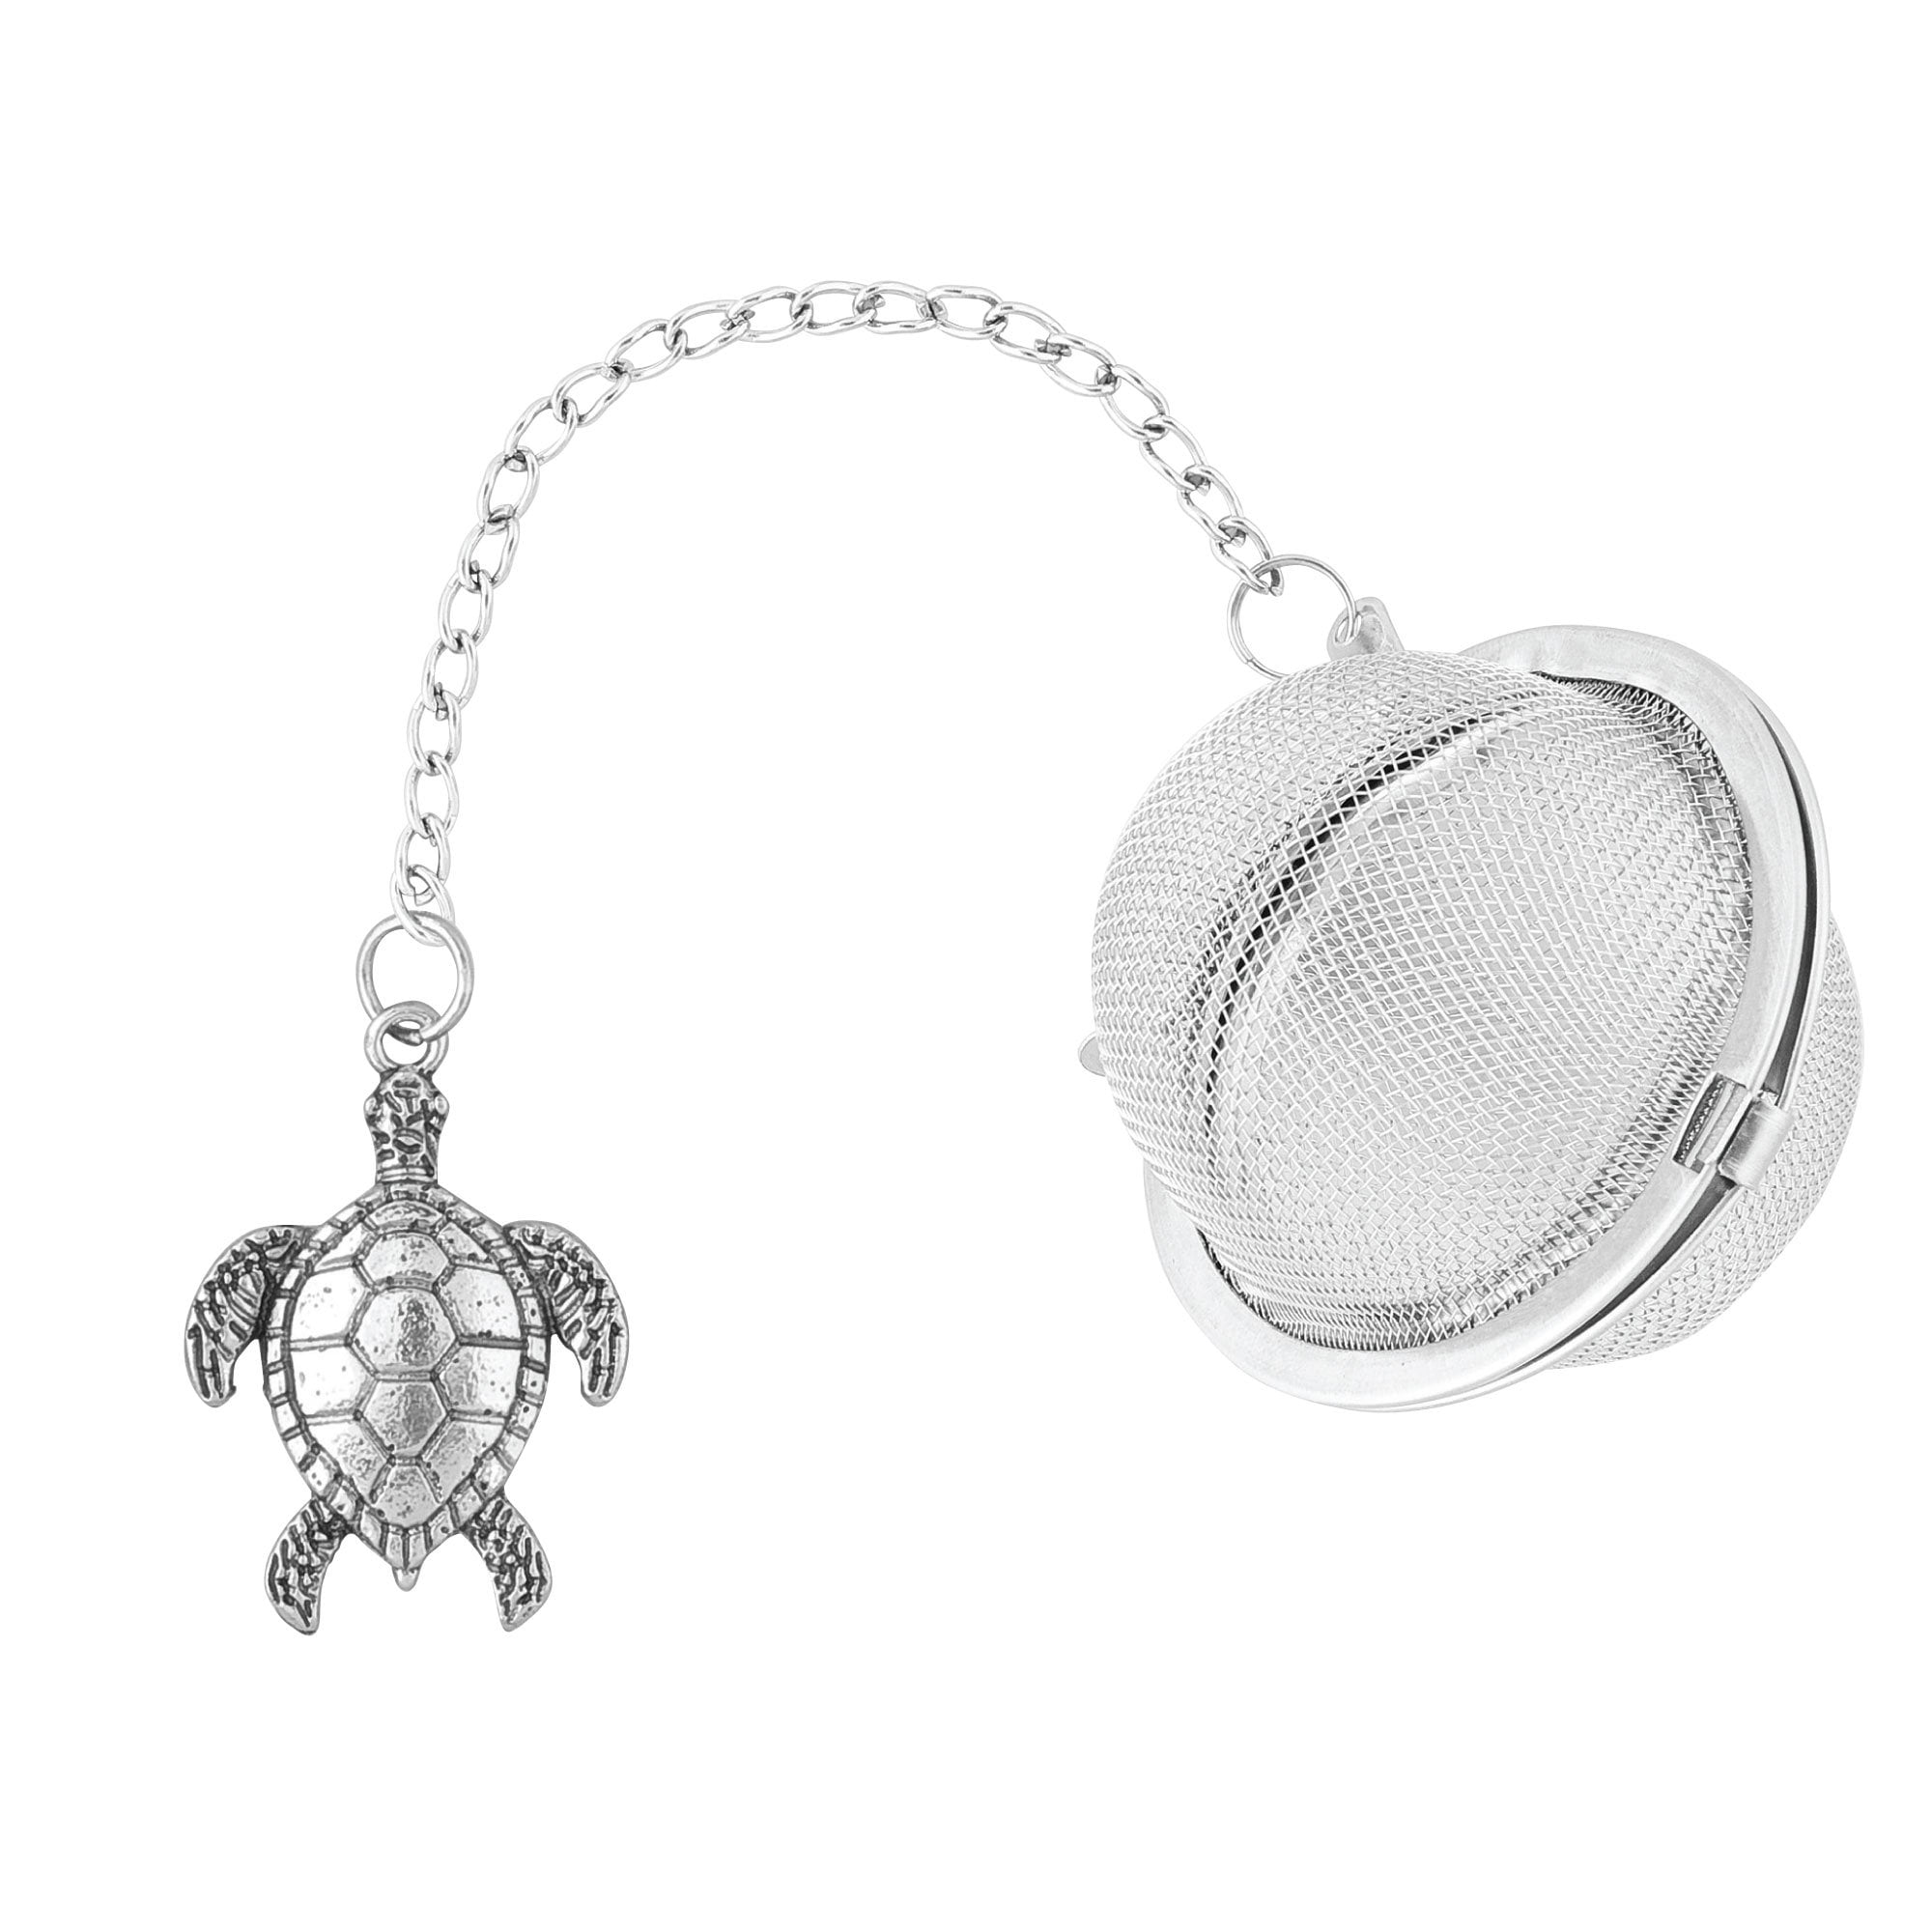 Supreme Housewares Supreme 18//8 Stainless Steel 2 Inch Mesh Tea Ball Infuser with Zinc Alloy Tennis Charm